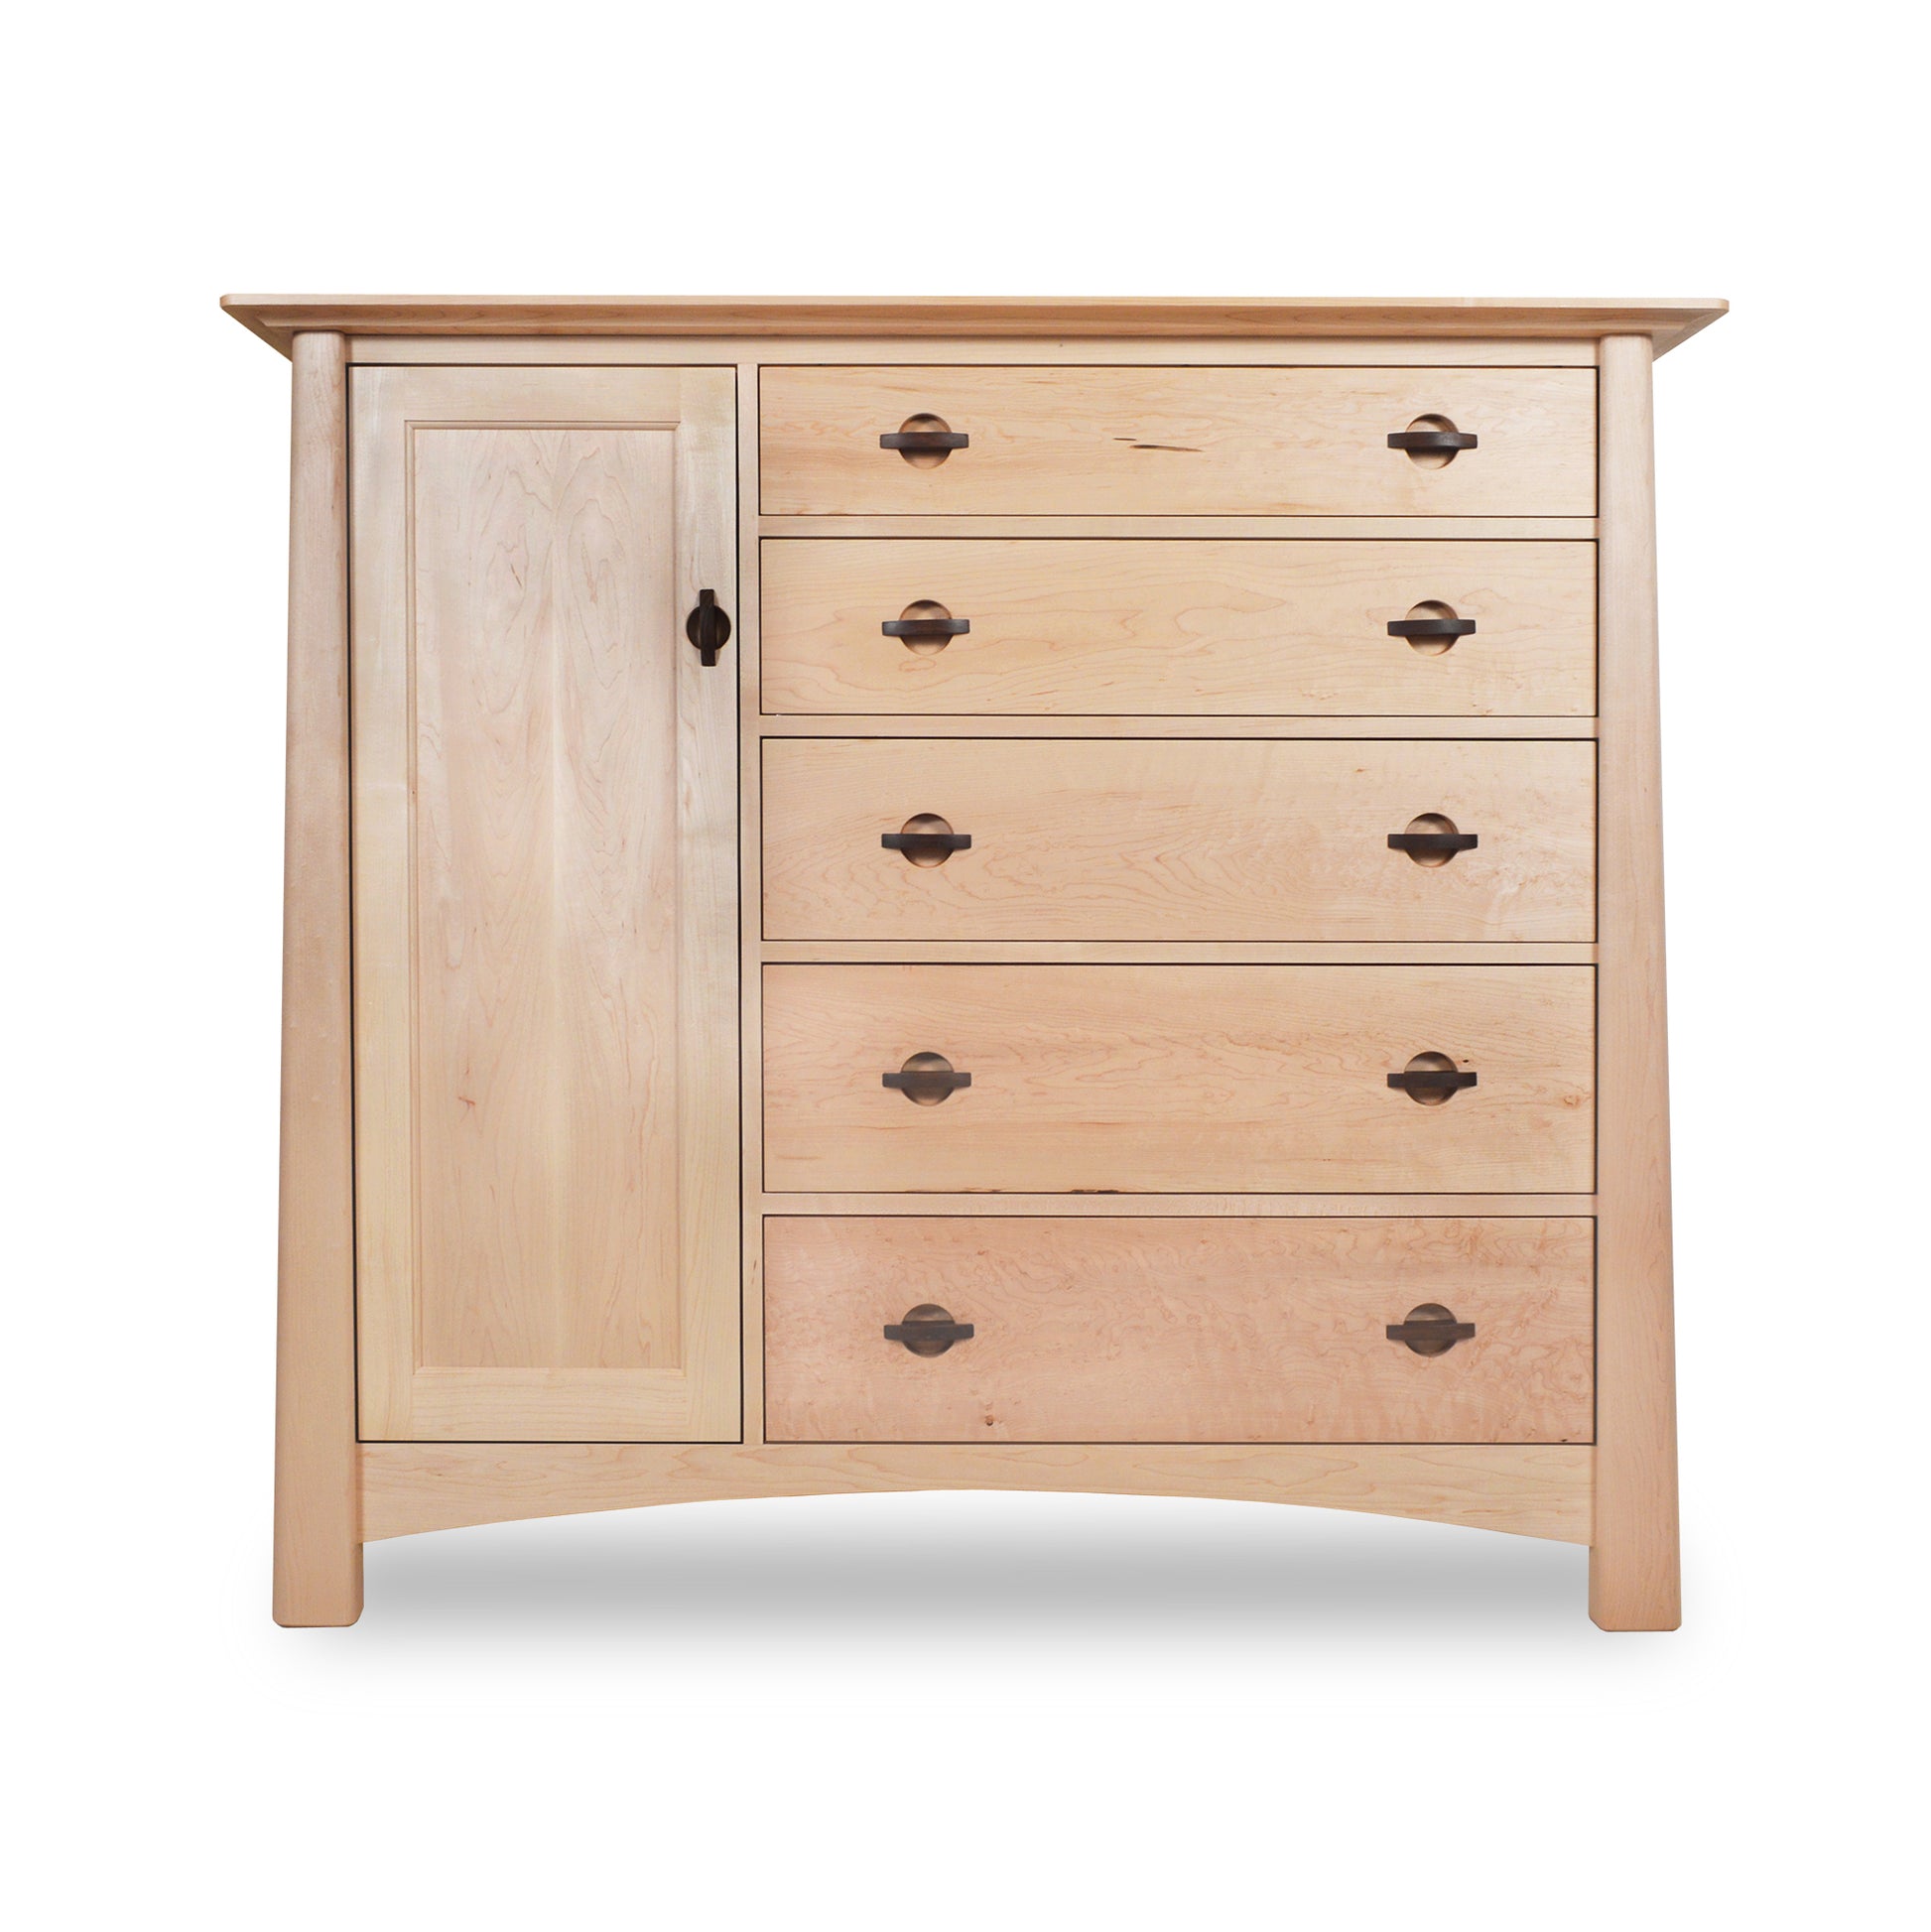 A Maple Corner Woodworks' Cherry Moon Gent's Chest with an eco-friendly oil finish.